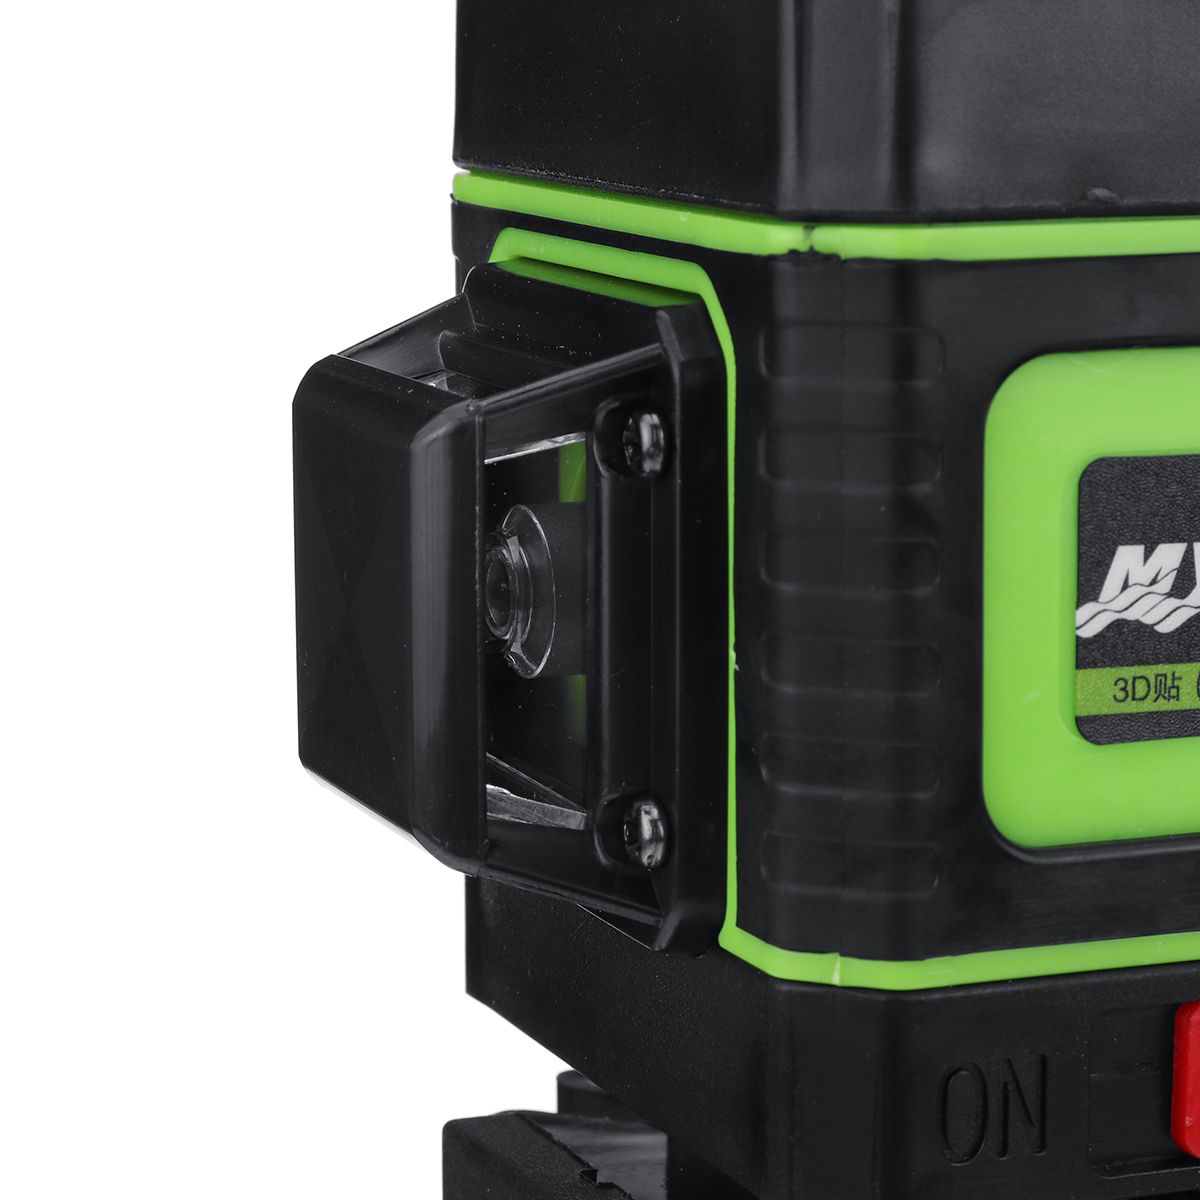 12-Greeen-Lines-Laser-Level-Measuring-DevicesLine-360-Degree-Rotary-Horizontal-And-Vertical-Cross-La-1545474